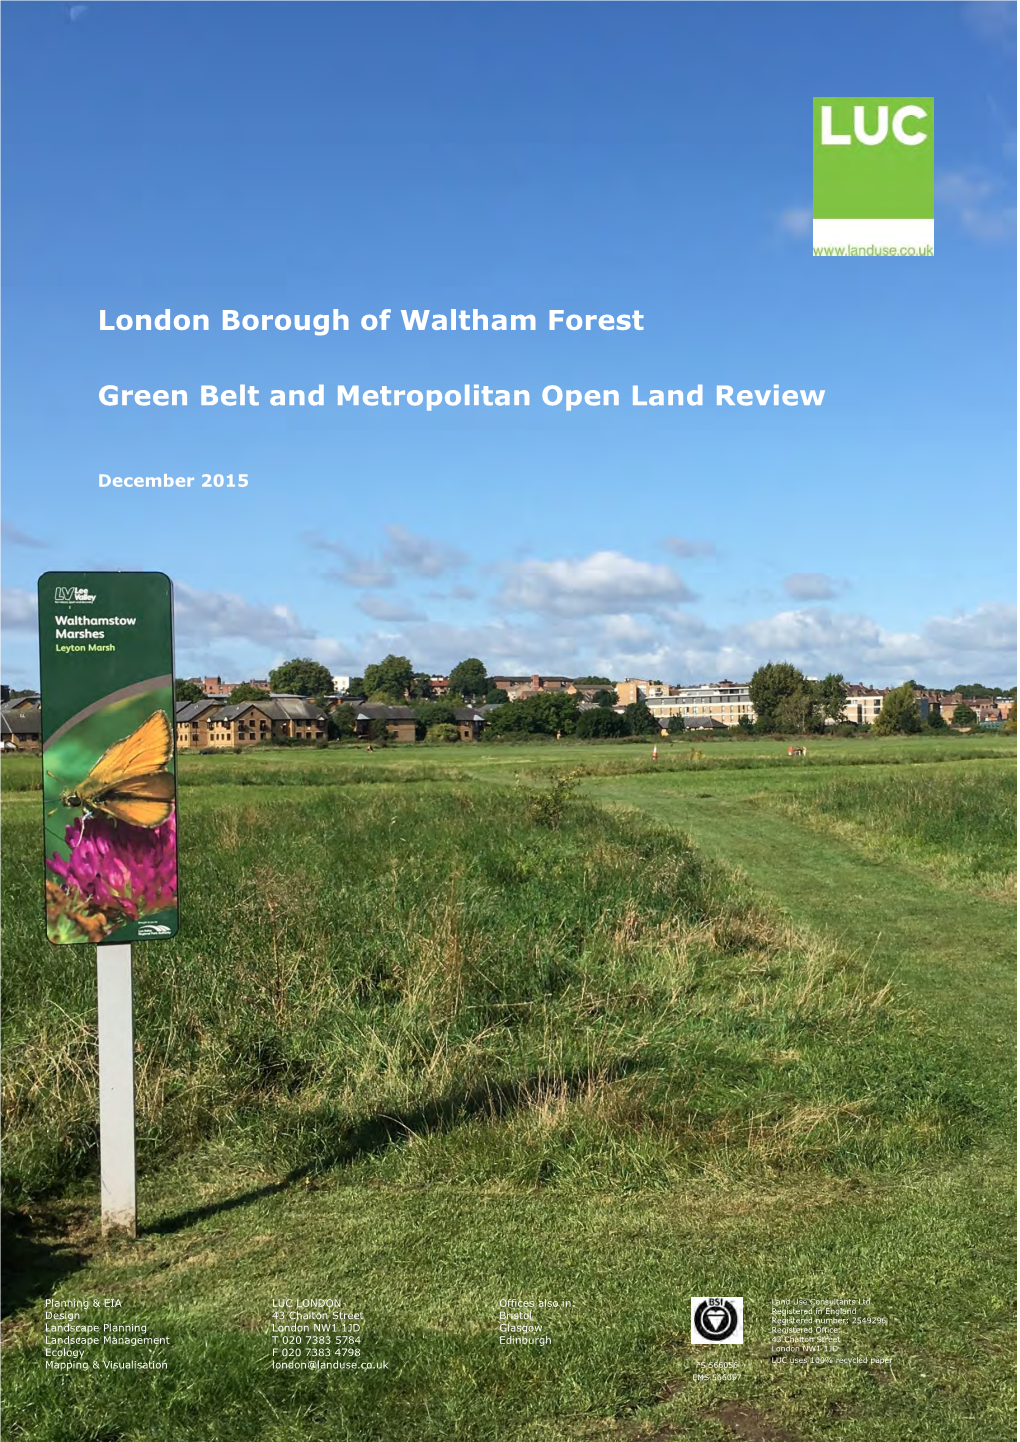 London Borough of Waltham Forest Green Belt and Metropolitan Open Land Review